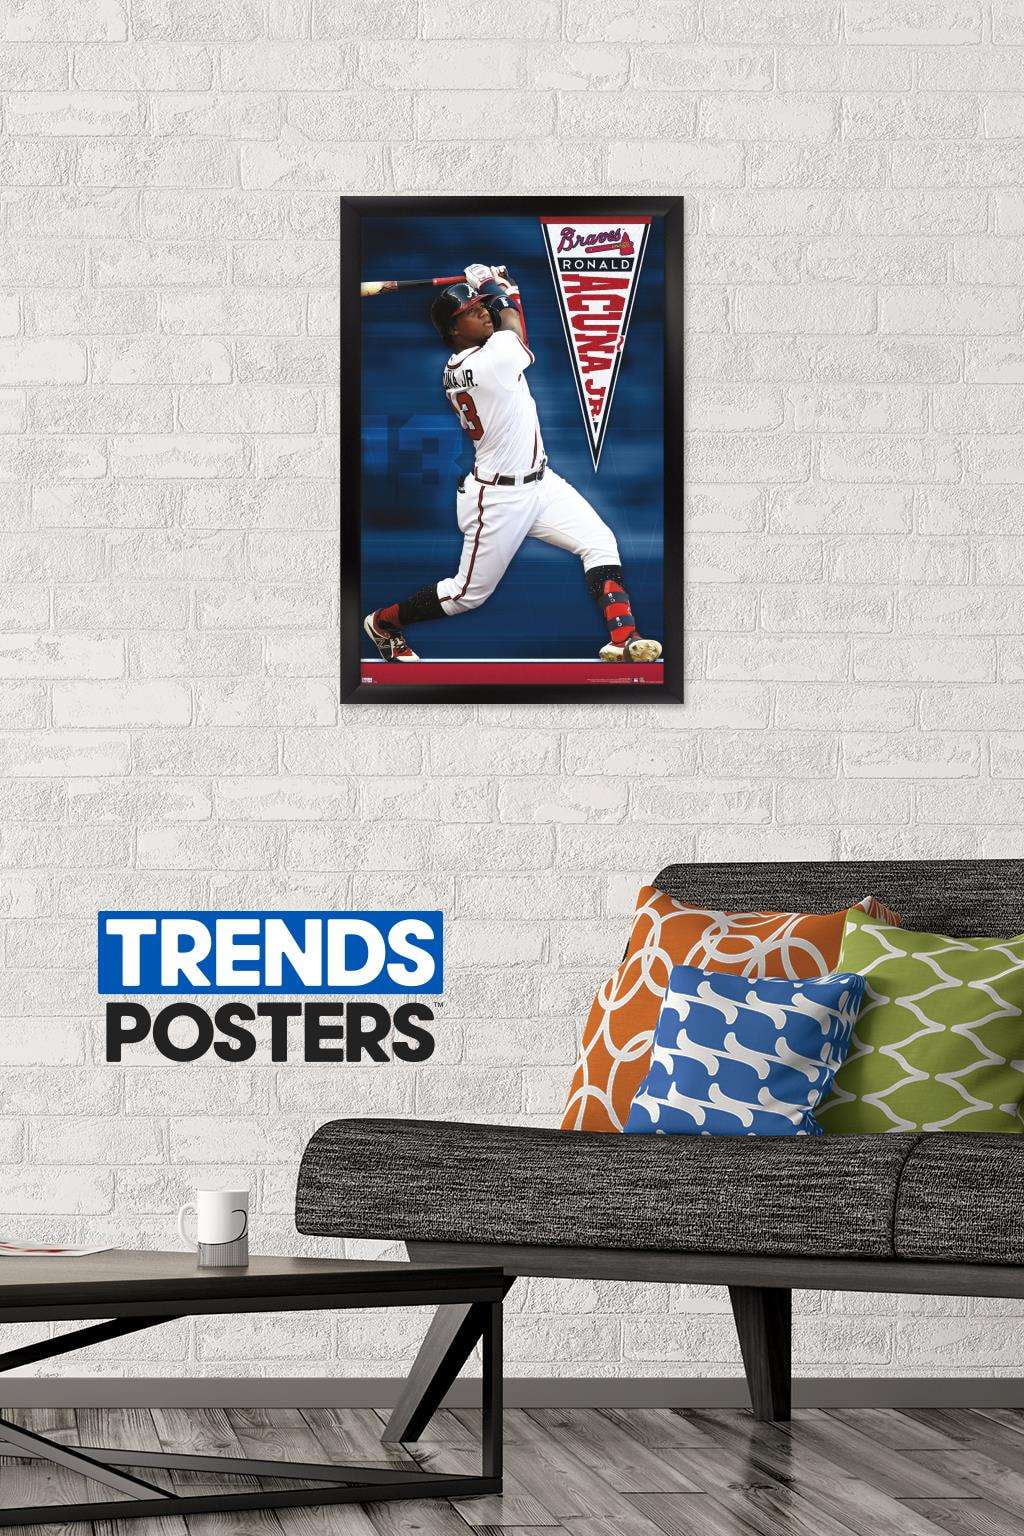 Ronald Acuna Jr Poster Baseball Art (10) Print Photo Art Painting Canvas  Poster Home Decorative Bedroom Modern Decor Posters Gifts 08x12inch(20x30cm)